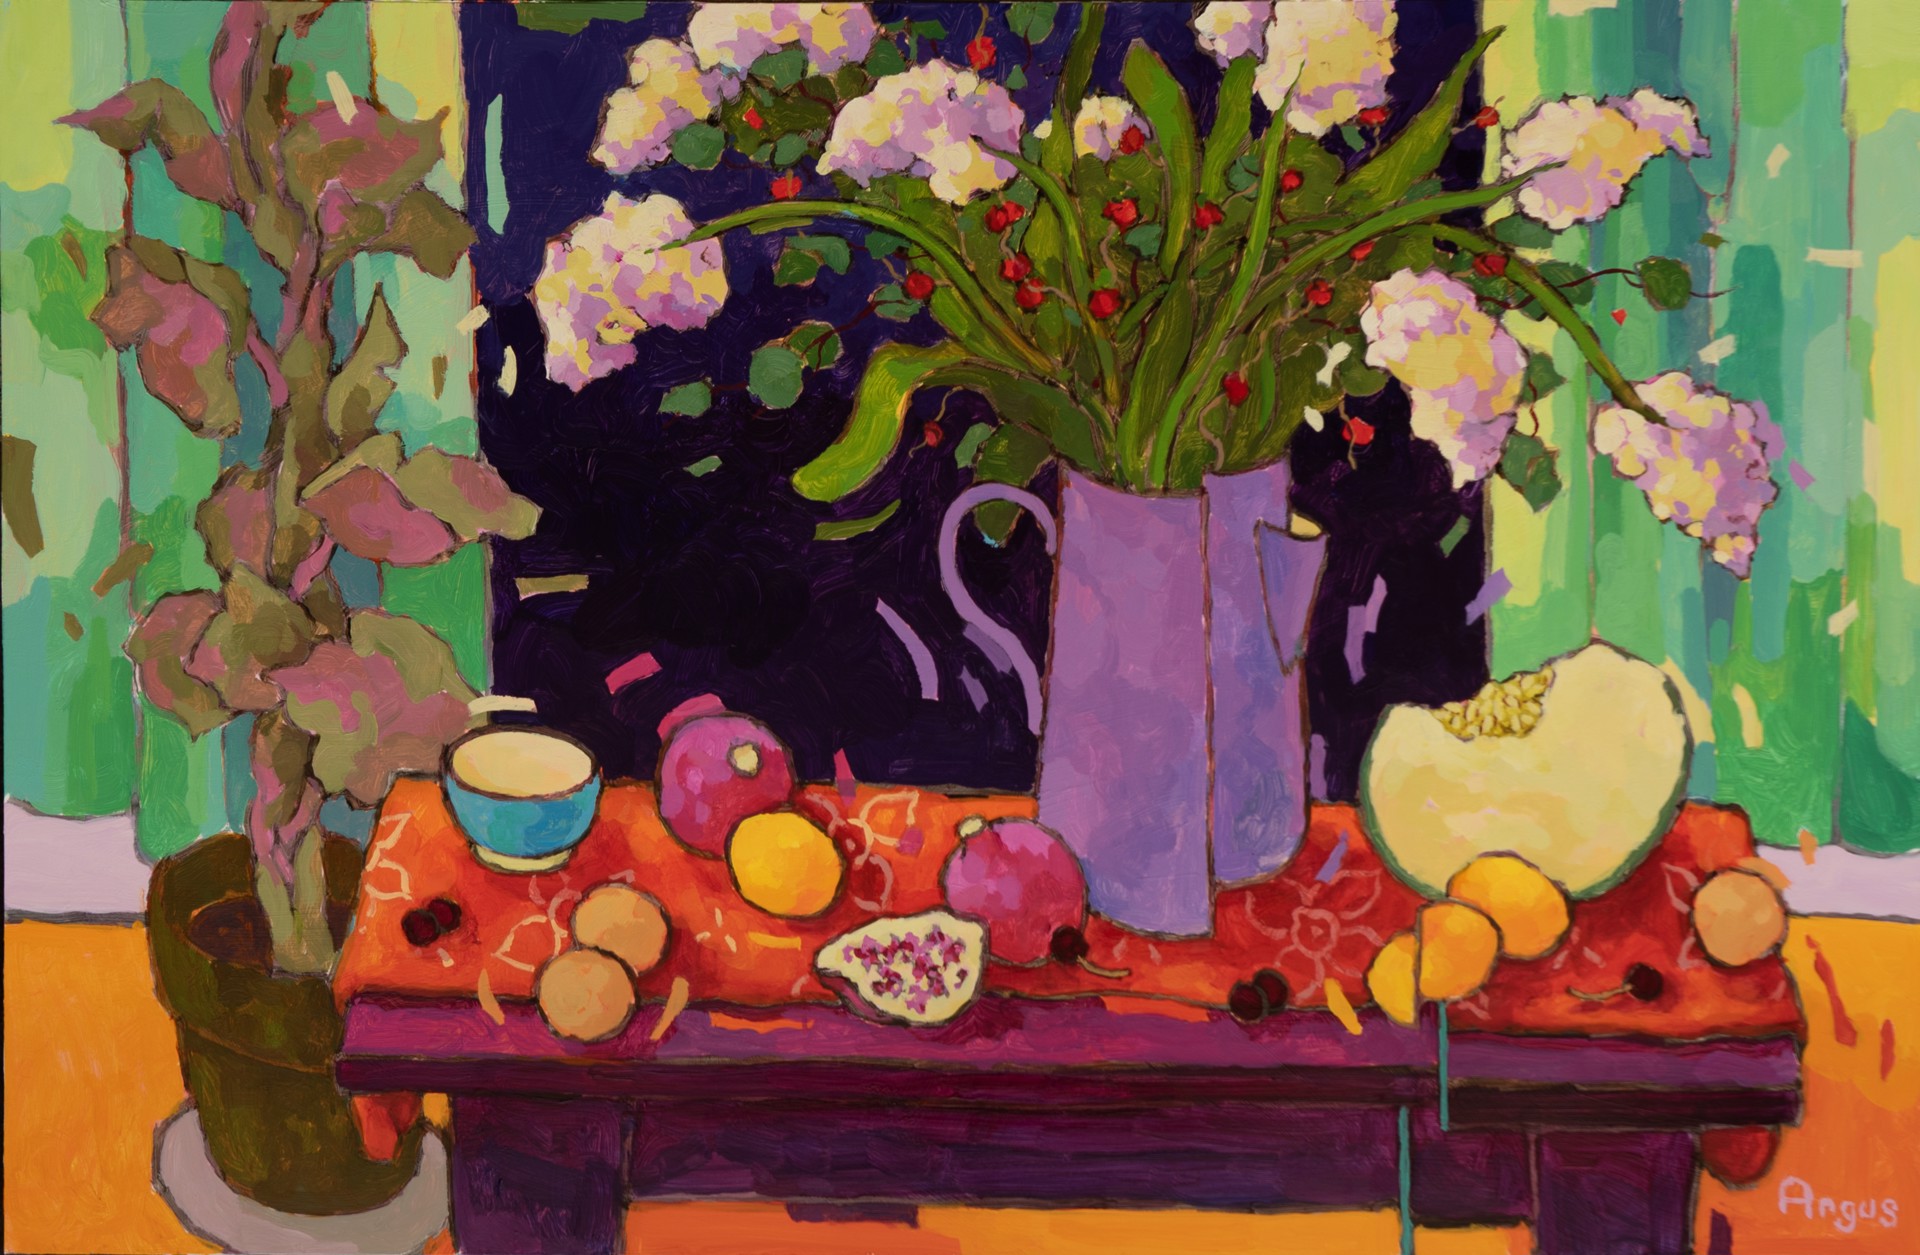 Arrangement with Pomegranate & Violet Pitcher by Angus